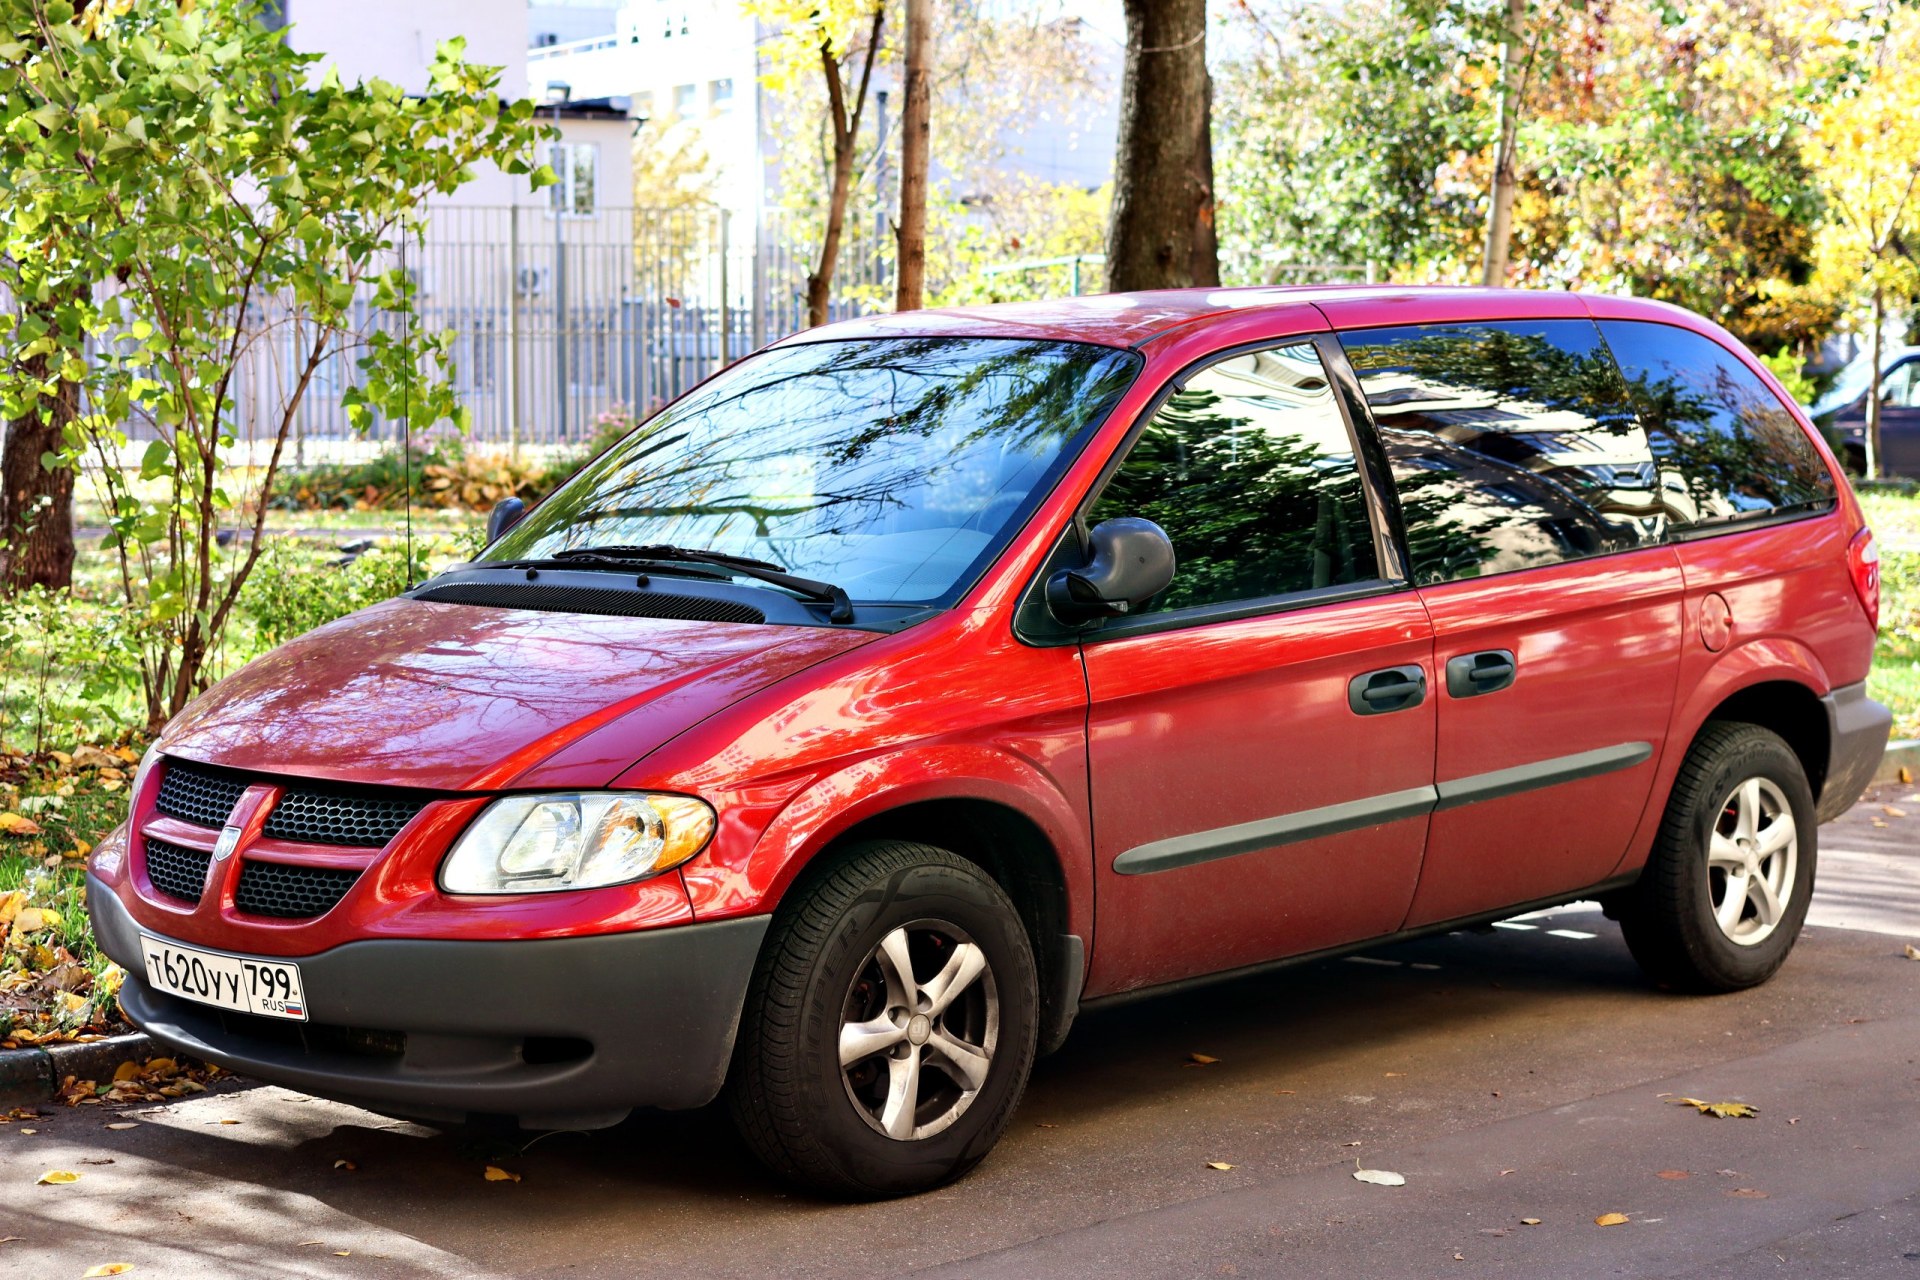 family passenger red car Dodge Grand Caravan is parked in the yard